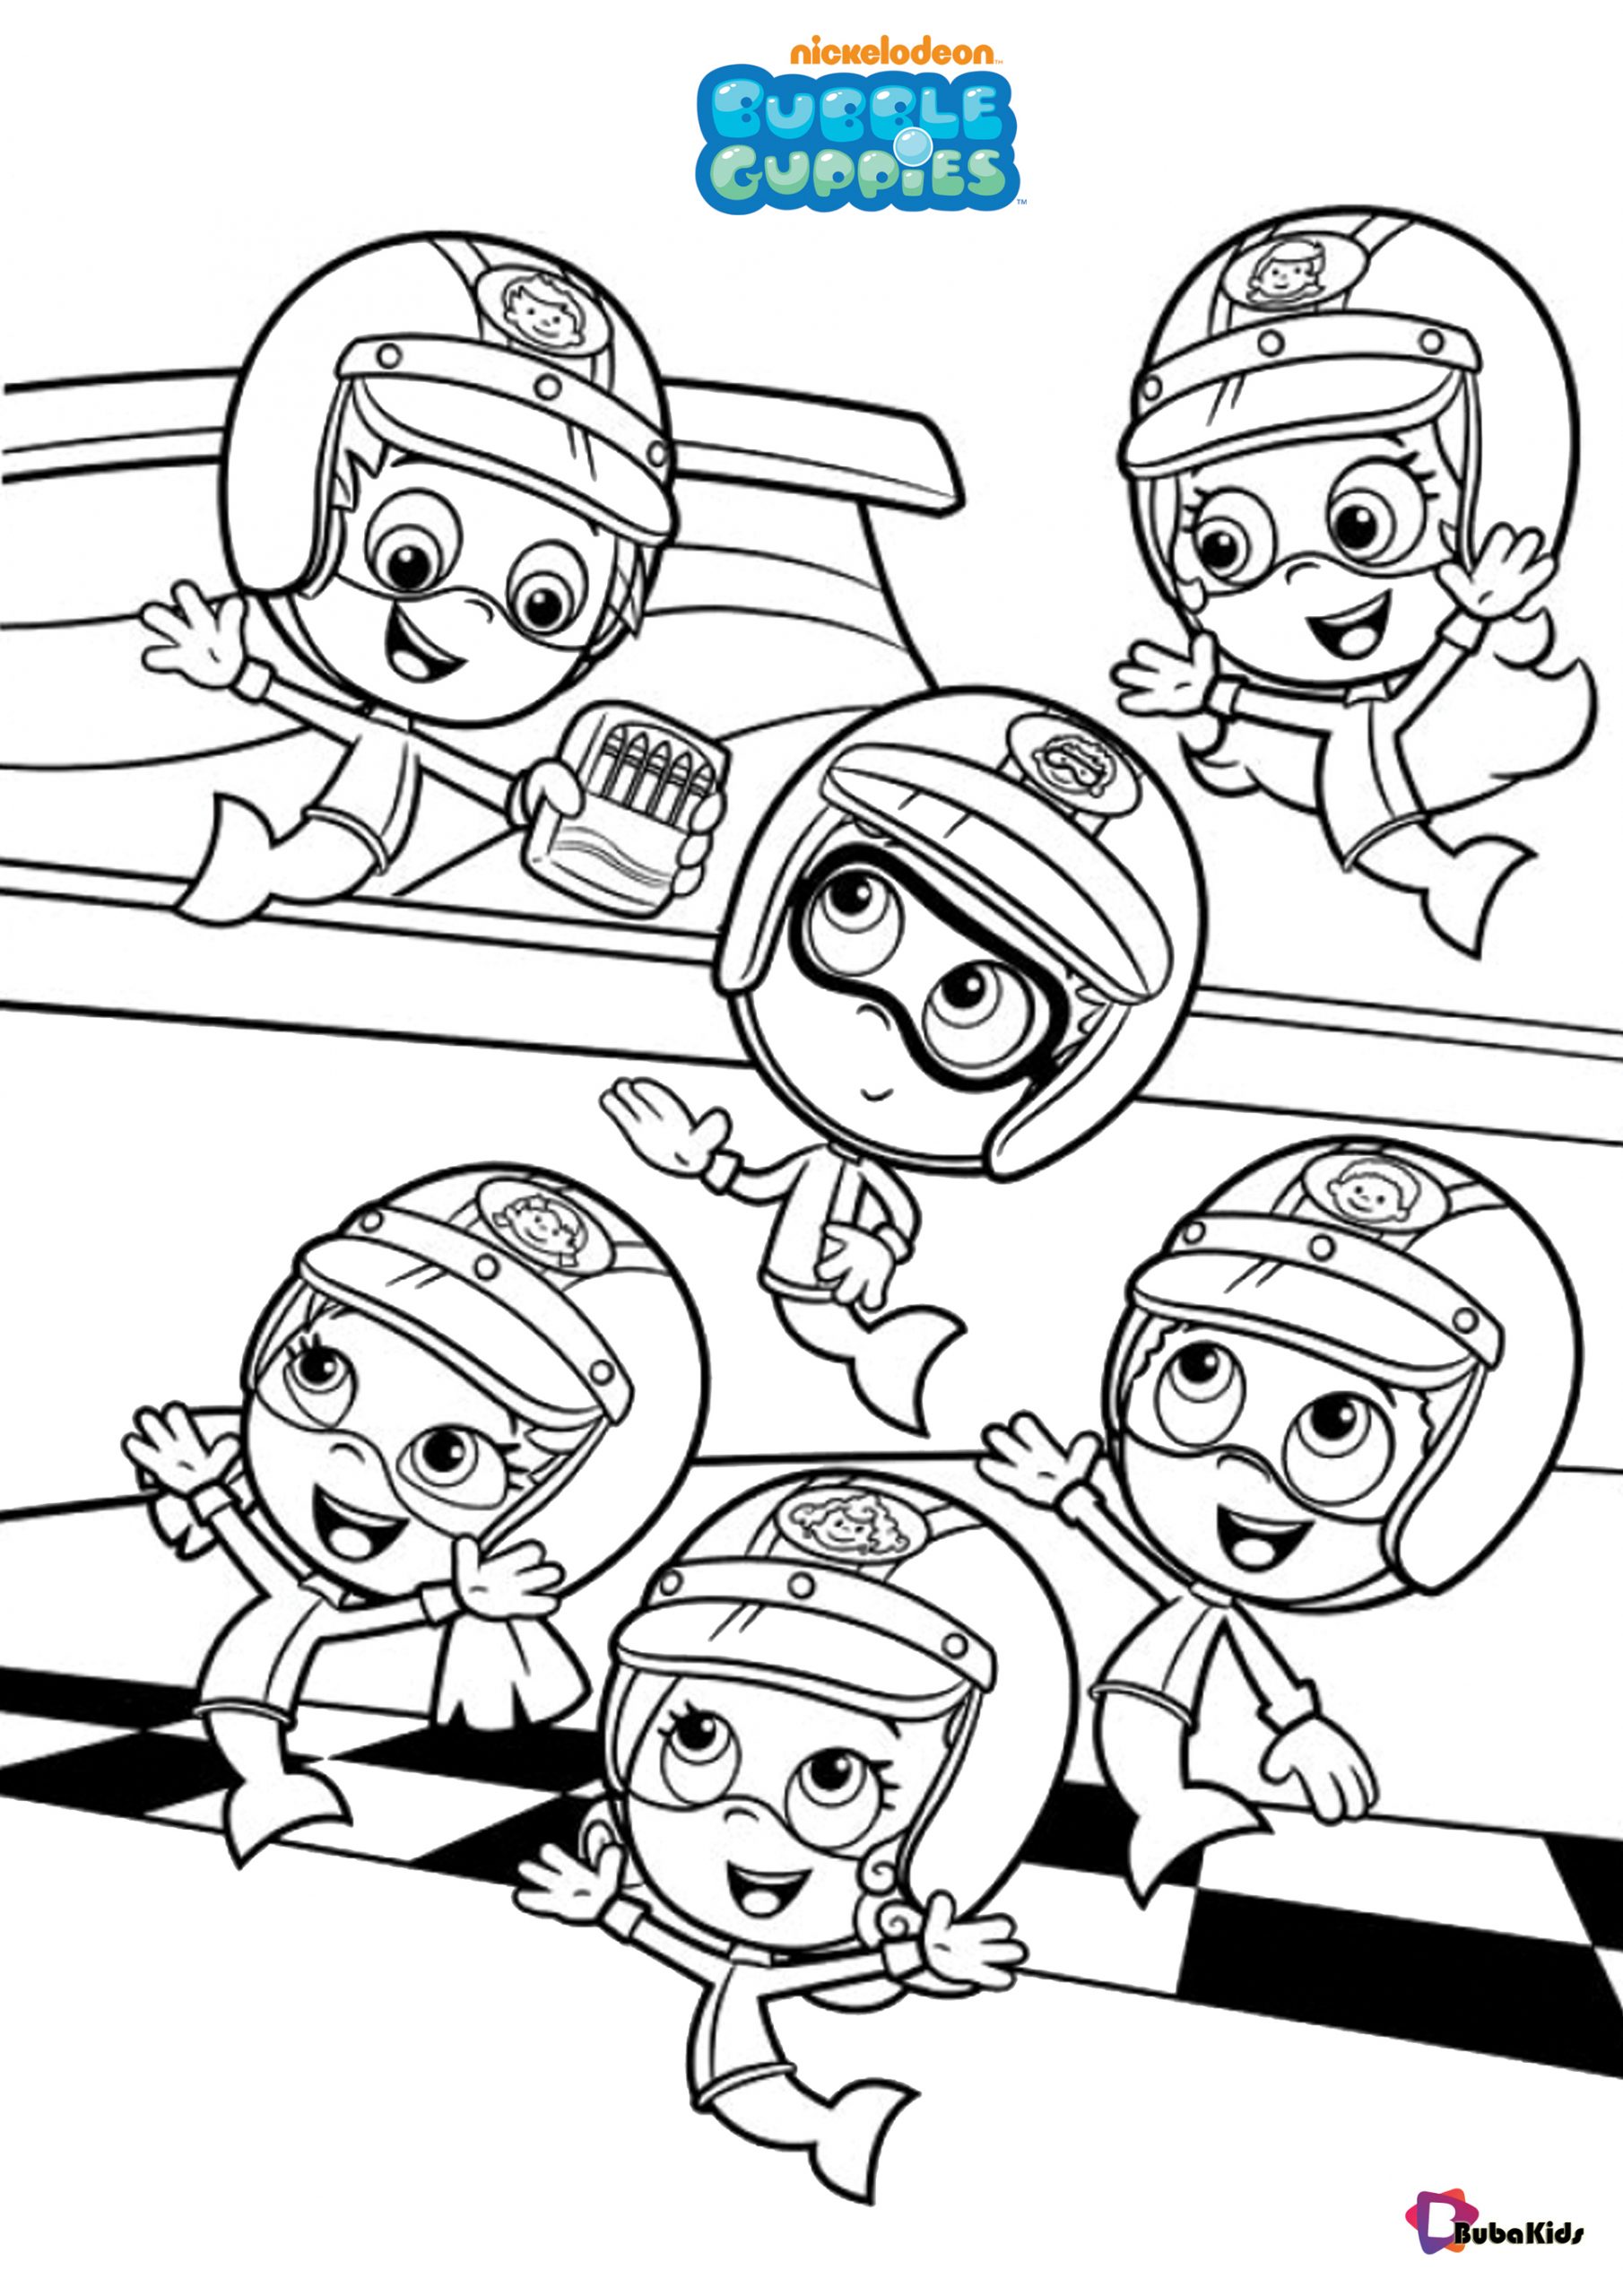 Free Bubble Guppies coloring pages to print